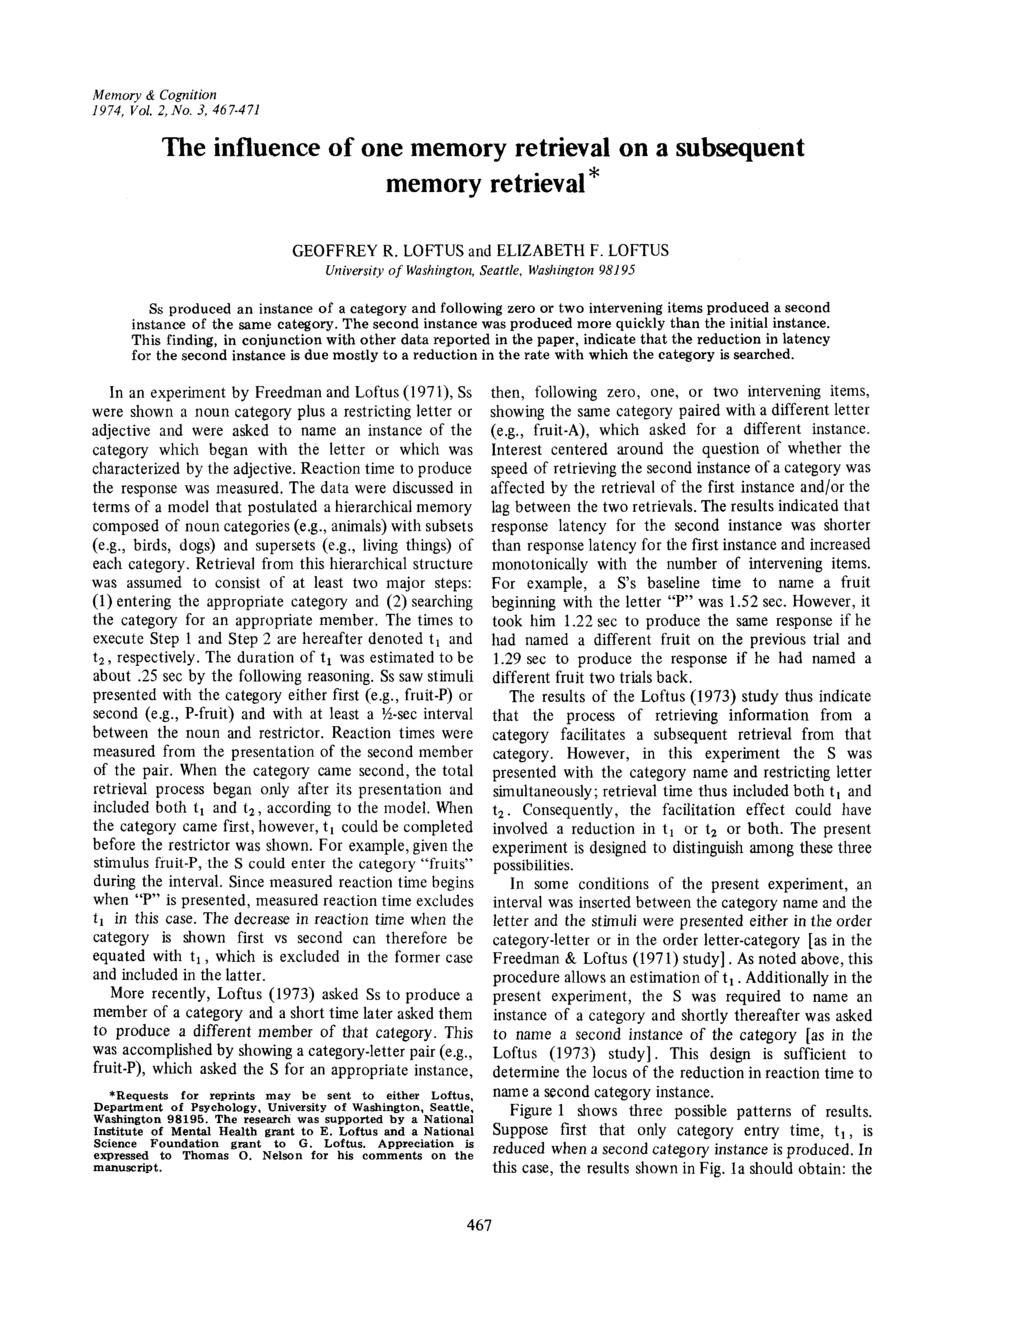 Memory & Cognition 1974, Vol. 2, No. 3, 467-471 The influence of one memory retrieval on a subsequent memory retrieval* GEOFFREY R. LOFTUS and ELIZABETH F.